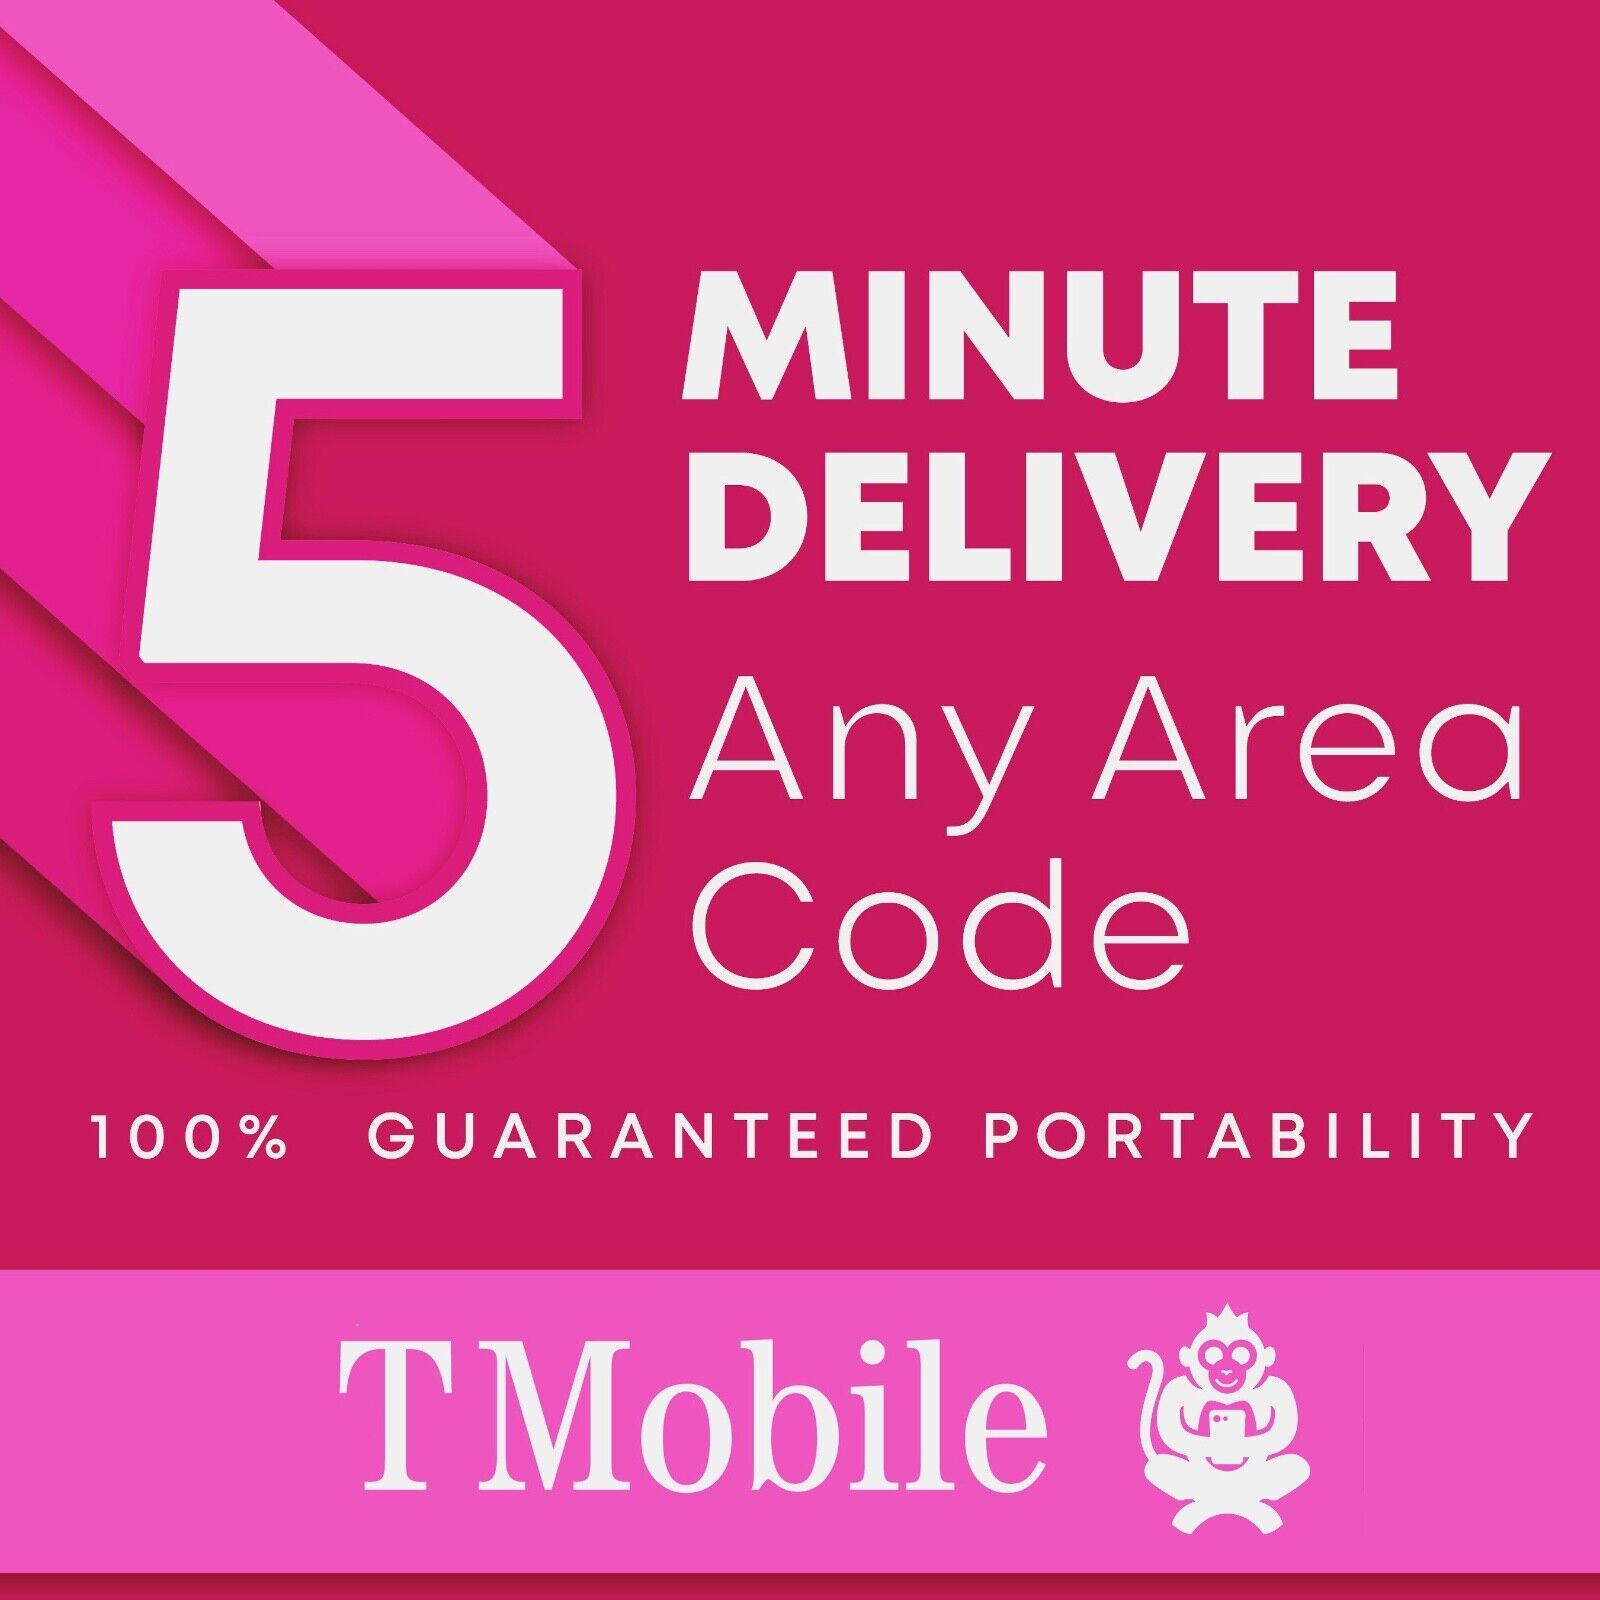 Lot of 5 - T-Mobile Prepaid Port Number - 5 MINUTE DELIVERY! - Any Area Code Boost Mobile